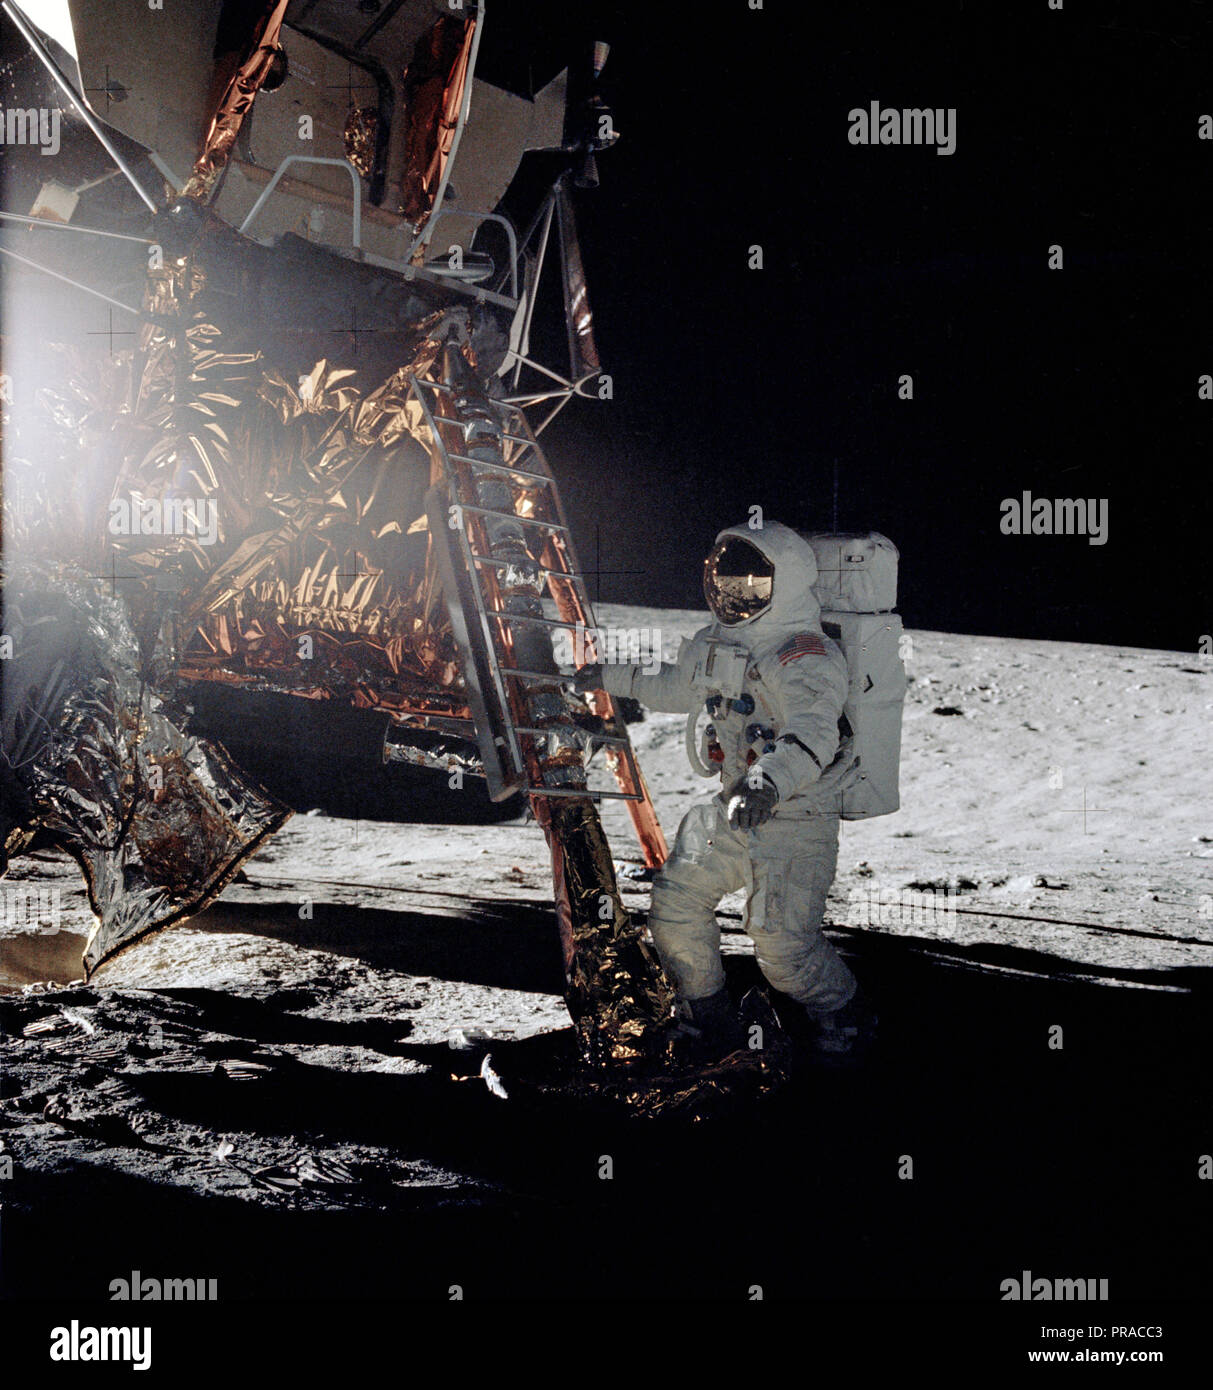 Astronaut Alan L. Bean, lunar module pilot for the Apollo 12 lunar landing mission, steps from the ladder of the Lunar Module to join astronaut Charles Conrad Jr., commander, in extravehicular activity on Nov. 19, 1969. Stock Photo